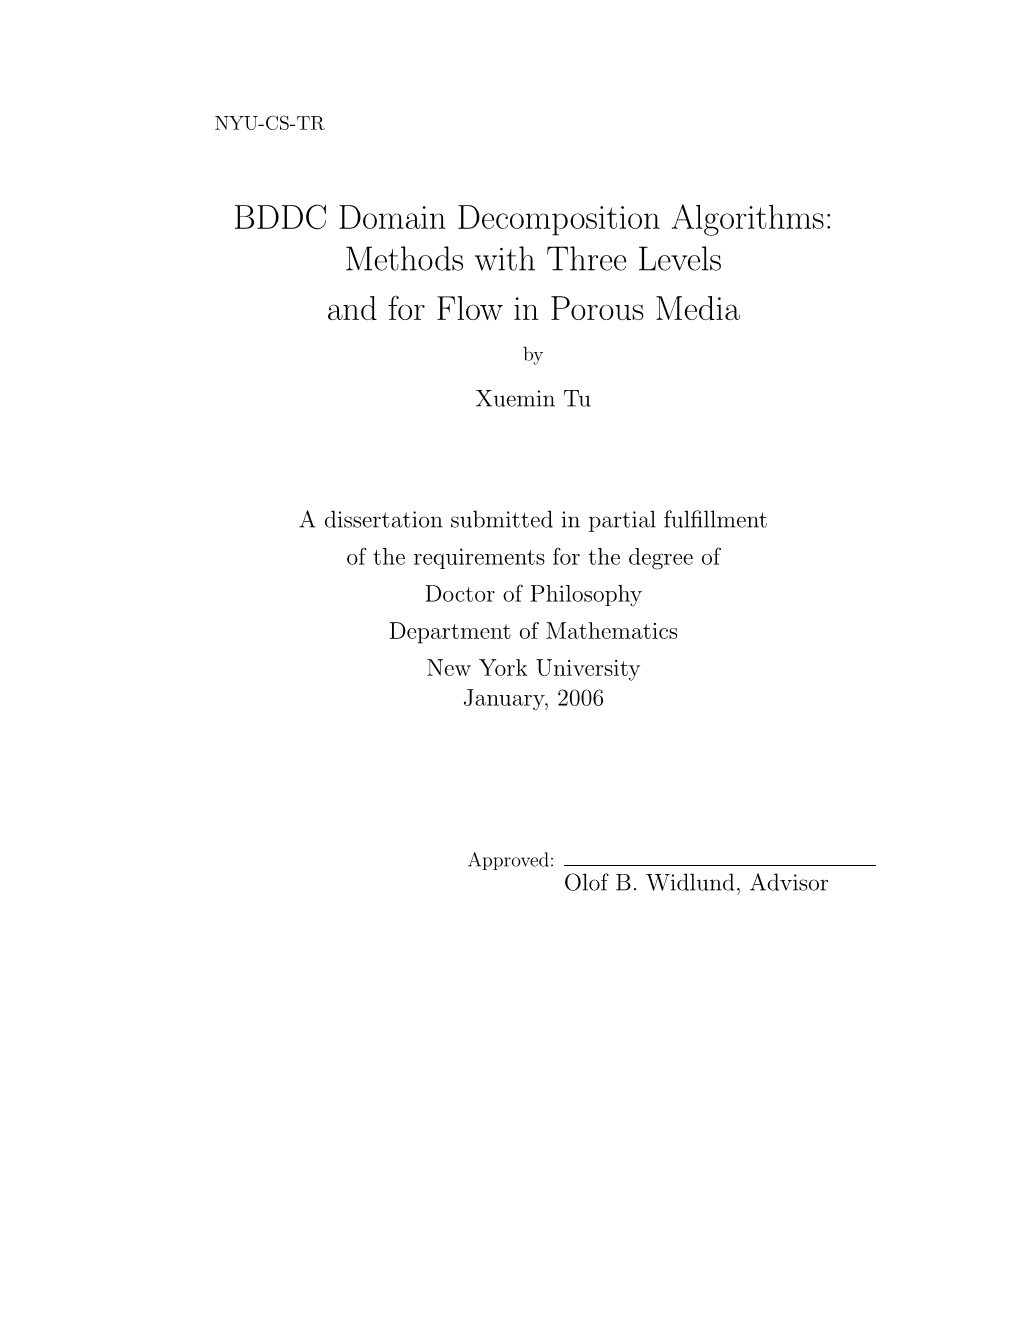 BDDC Domain Decomposition Algorithms: Methods with Three Levels and for Flow in Porous Media by Xuemin Tu